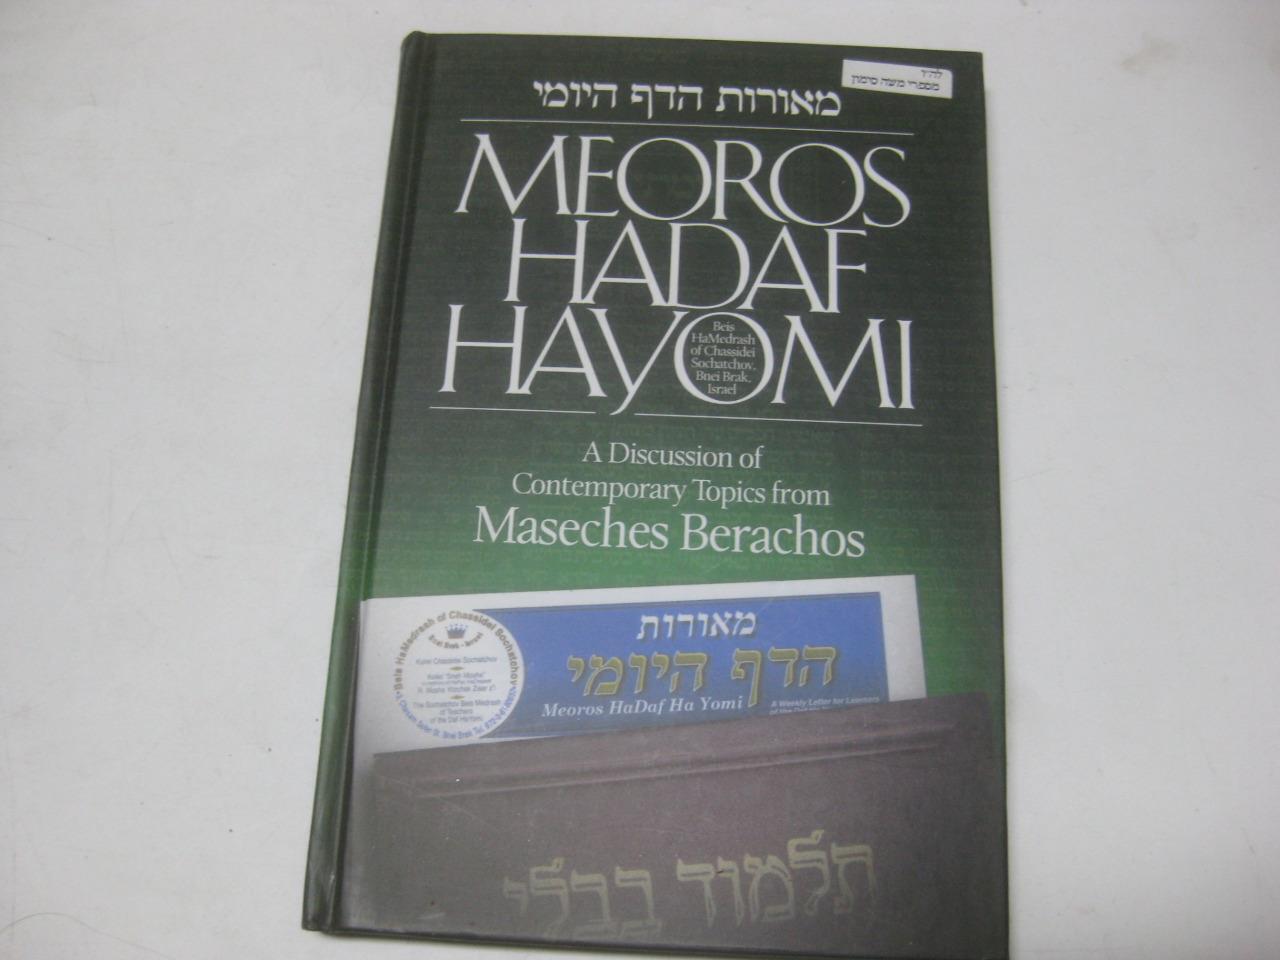 Meoros hadaf hayomi : a discussion of contemporary topics from maseches BERACHOS